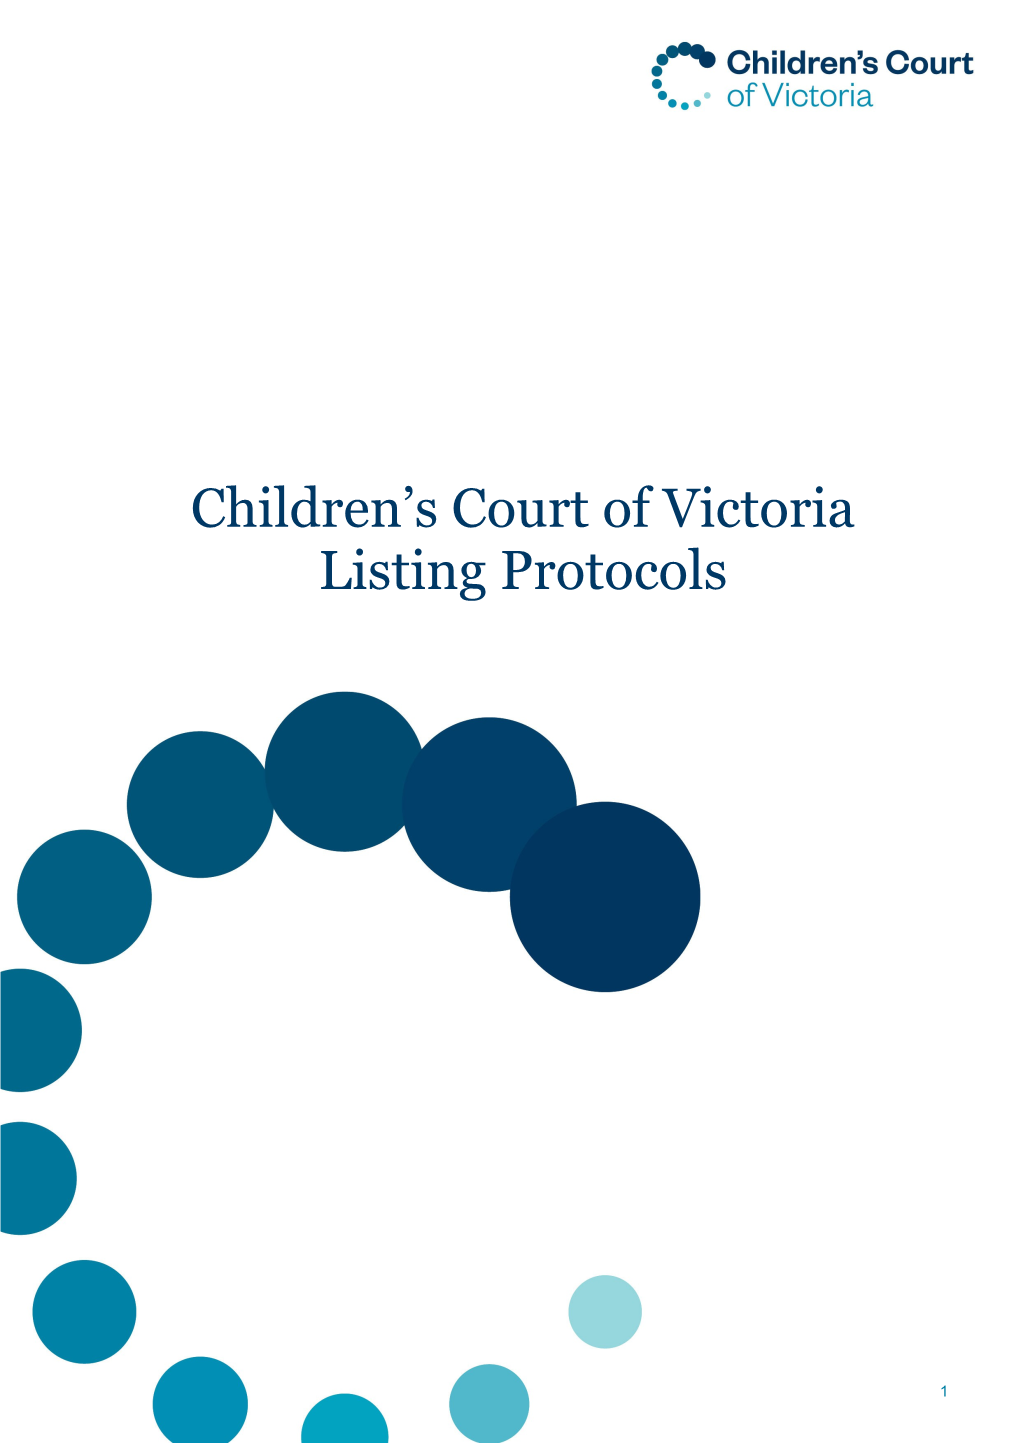 President of the Children S Court of Victoria